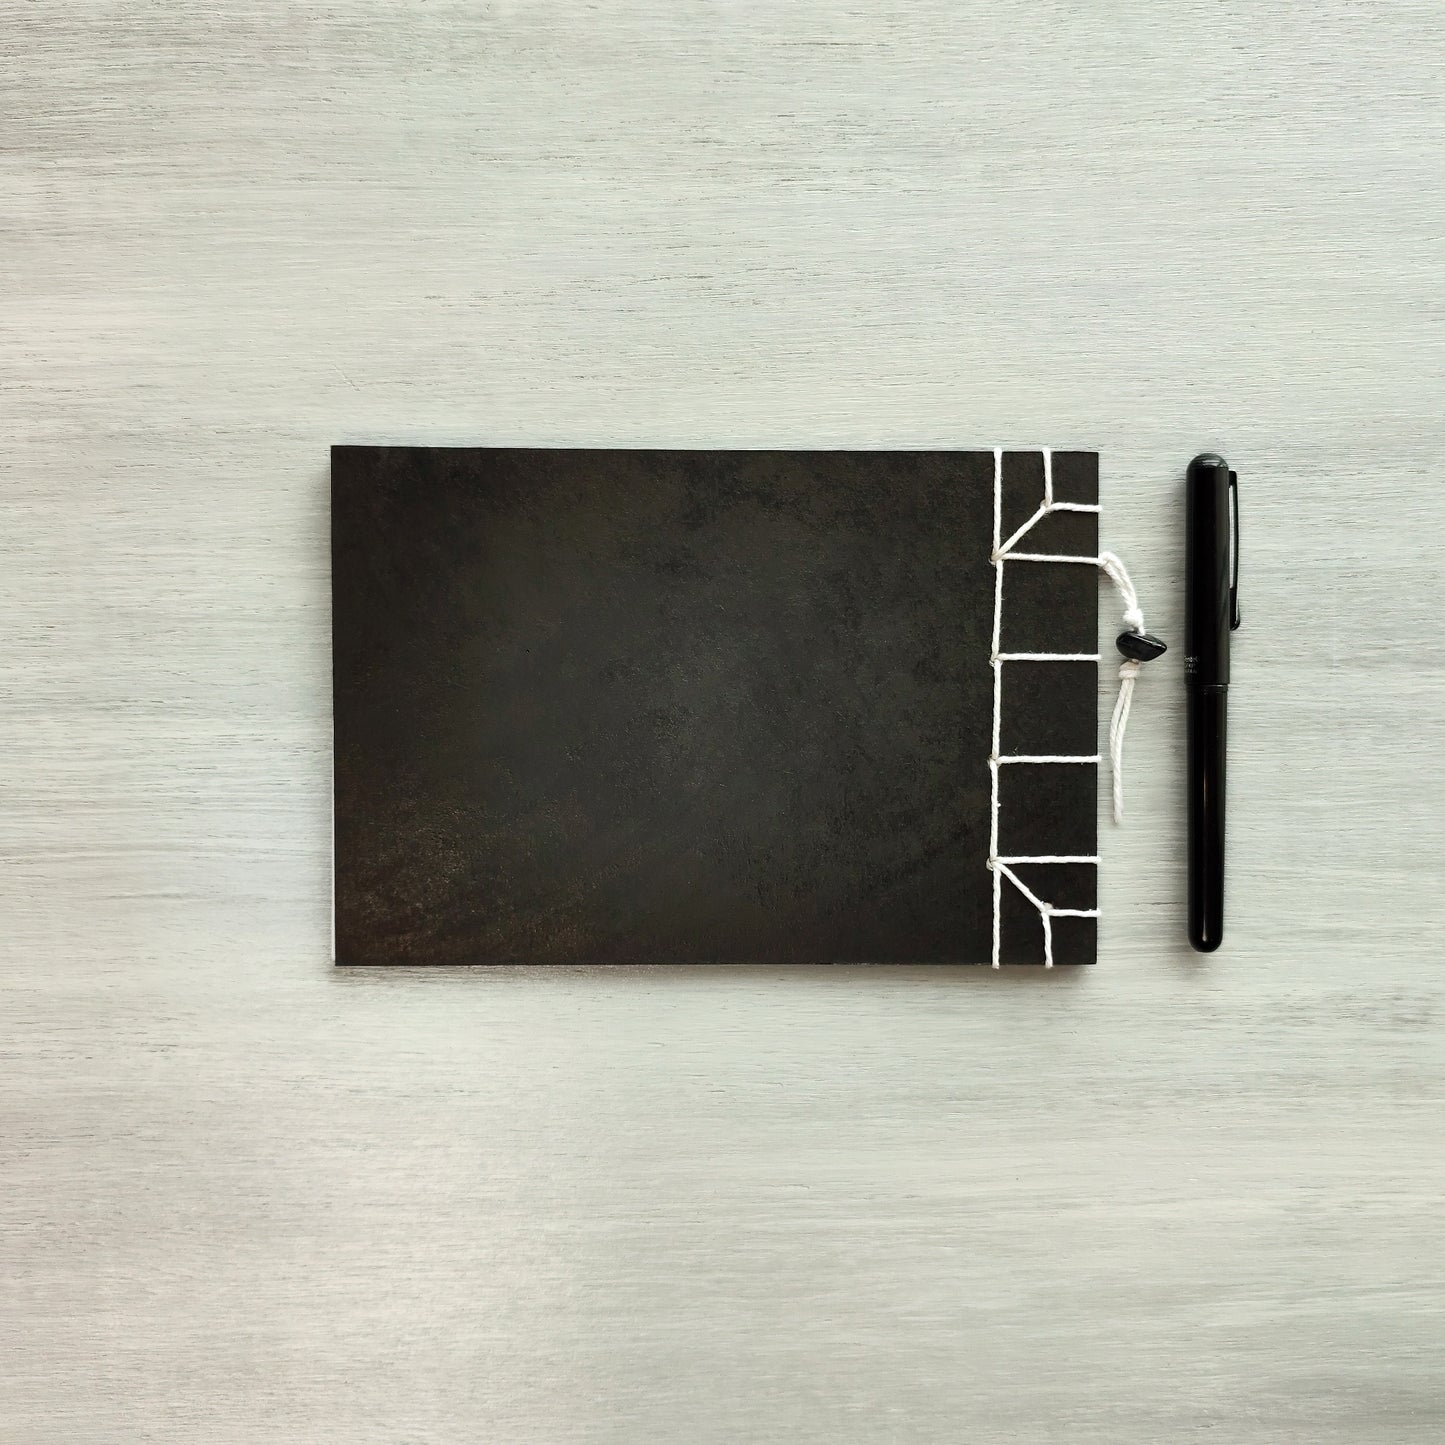 Watoji Notebook - 4 | Black and White collection